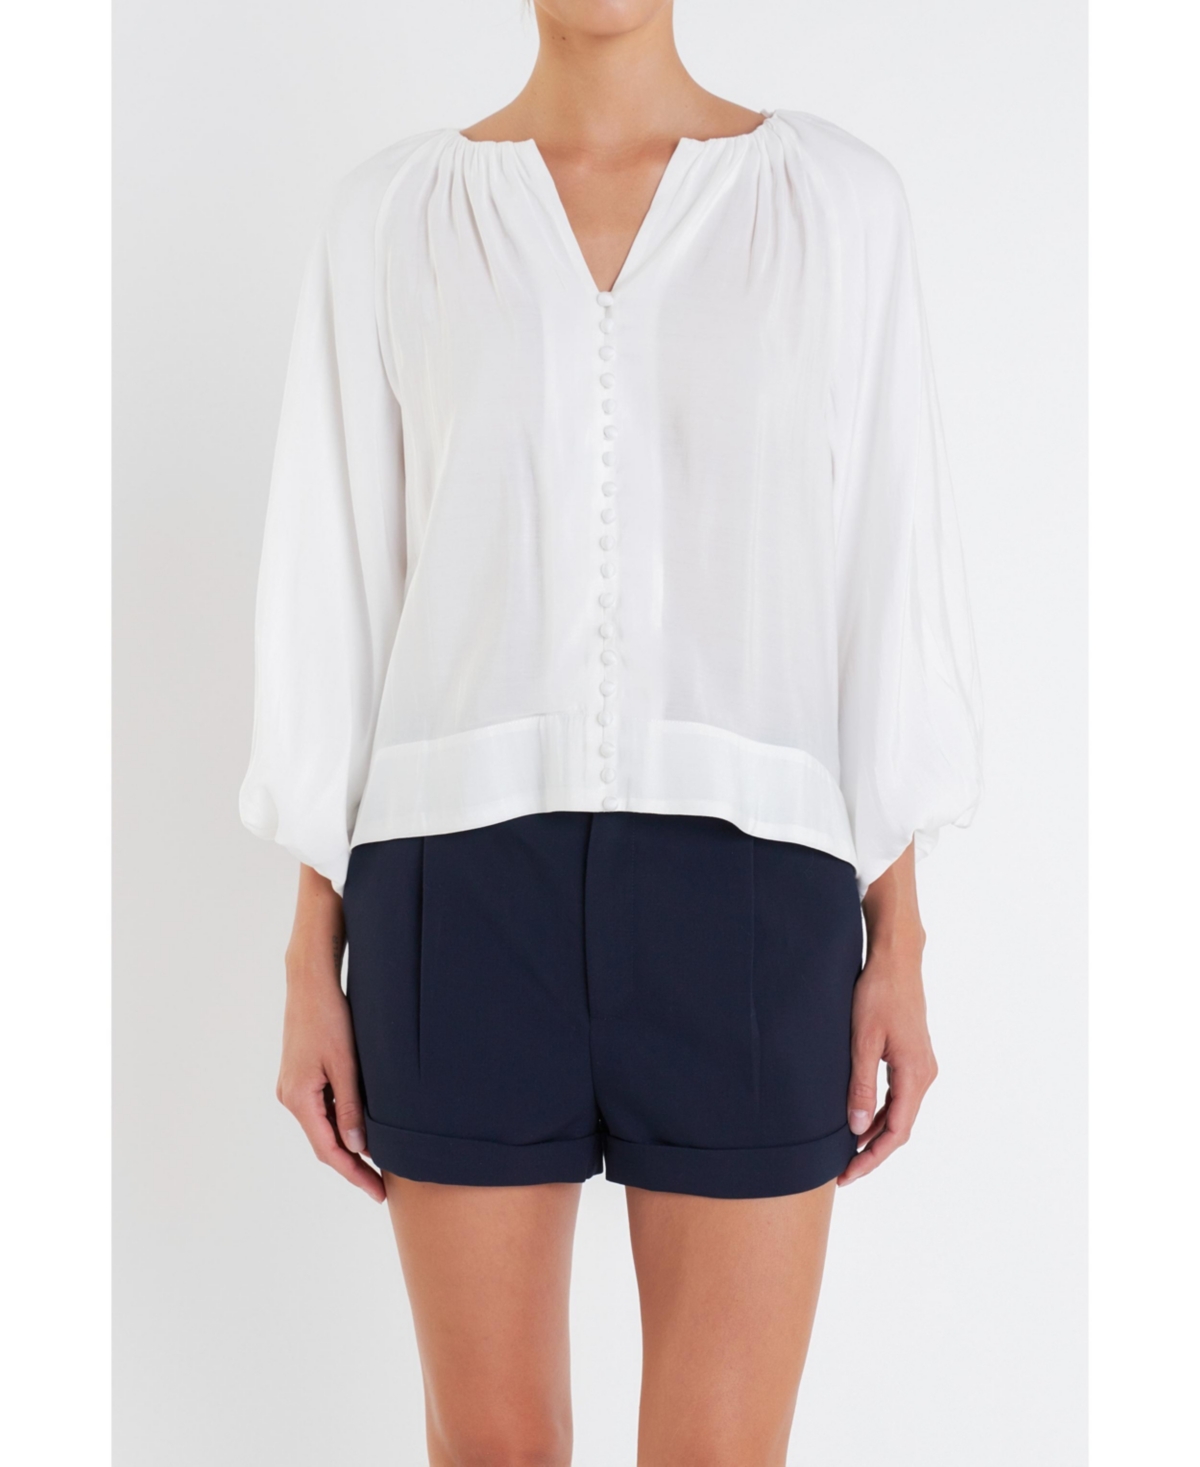 Women's Shirringed Puff Sleeves Top - Off white